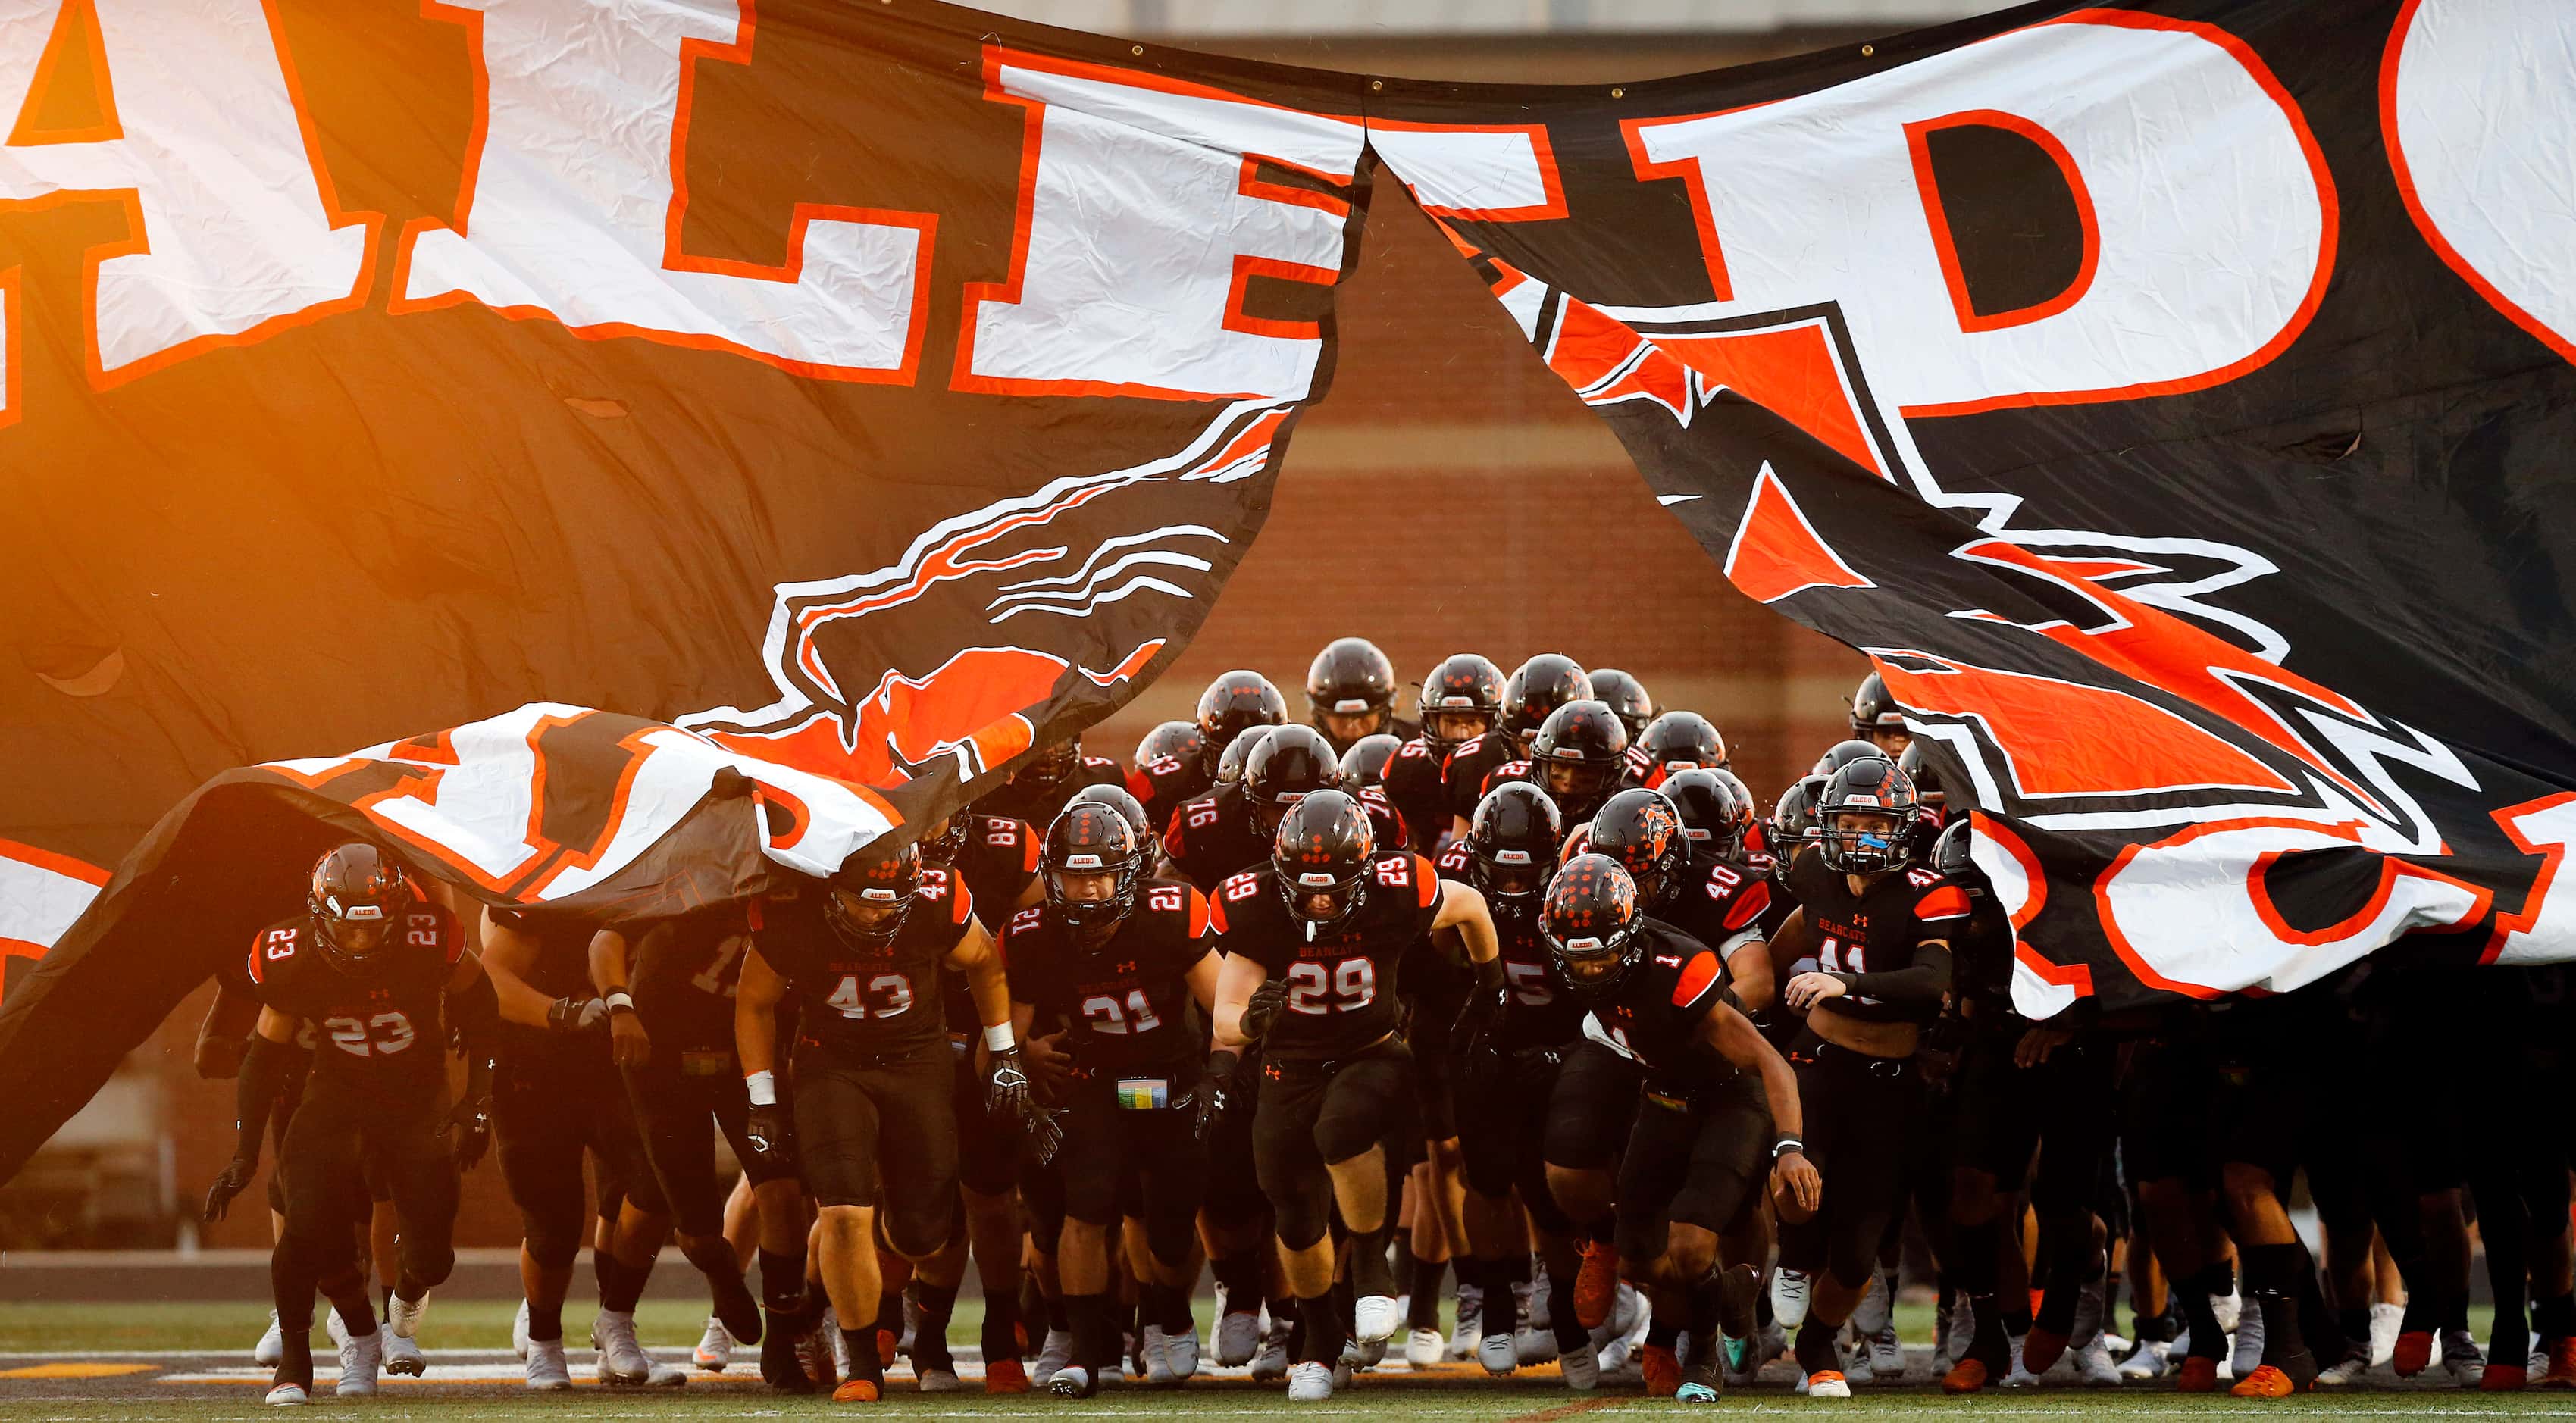 The Aledo Bearcats football team bust through the banner as they take the field to face...